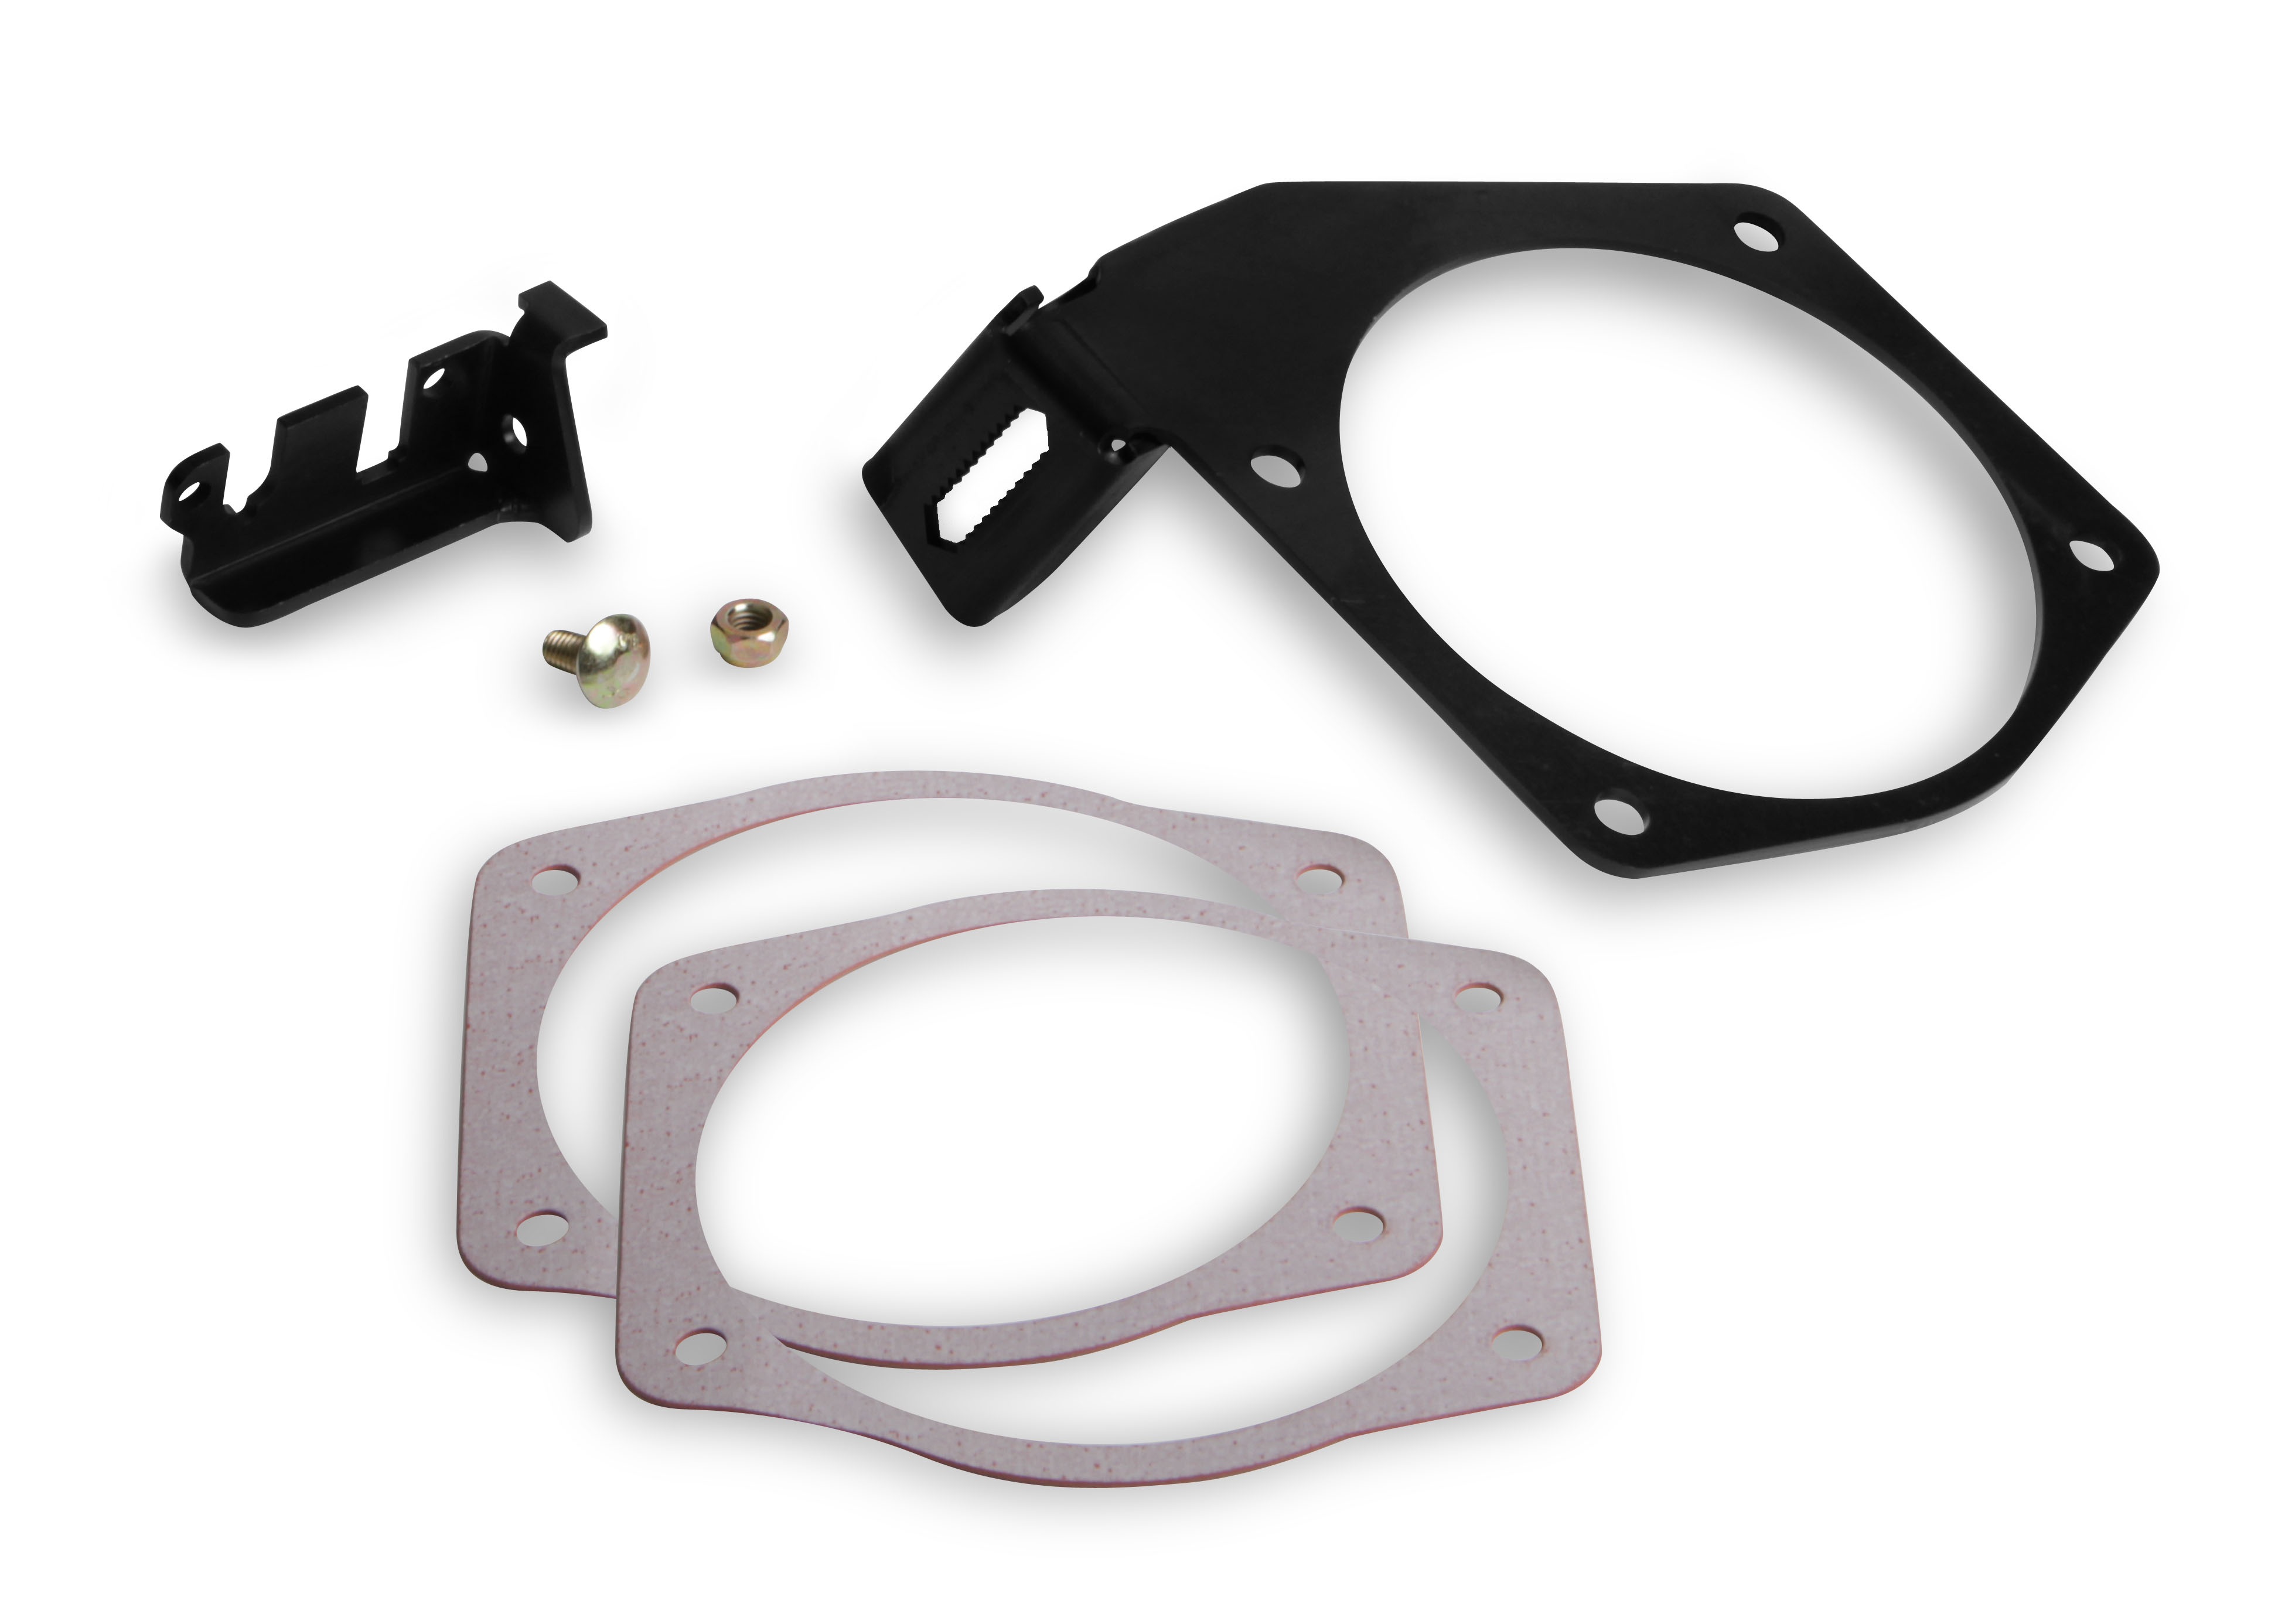 LS Holley Cable Bracket for 105mm Throttle Bodies & Factory or FAST Style Intakes